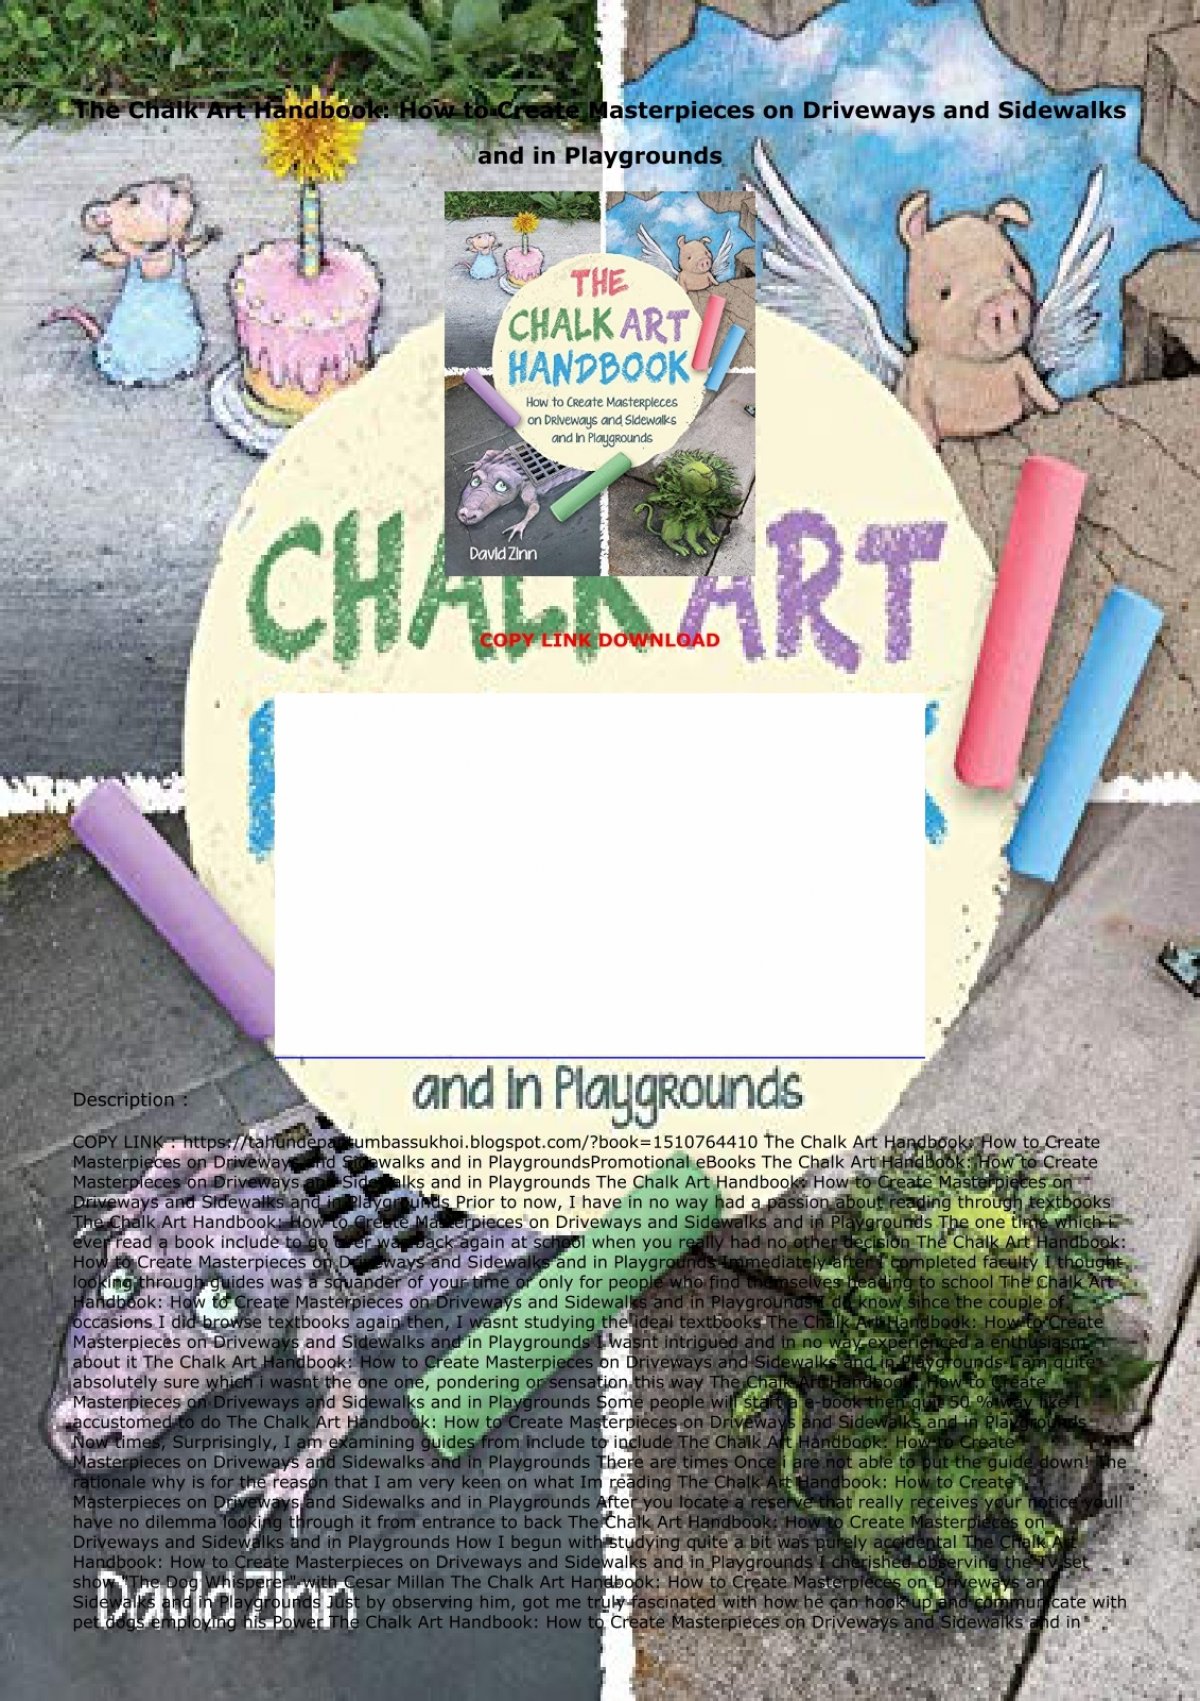 DOWNLOAD [PDF] The Chalk Art Handbook: How to Create Masterpieces on